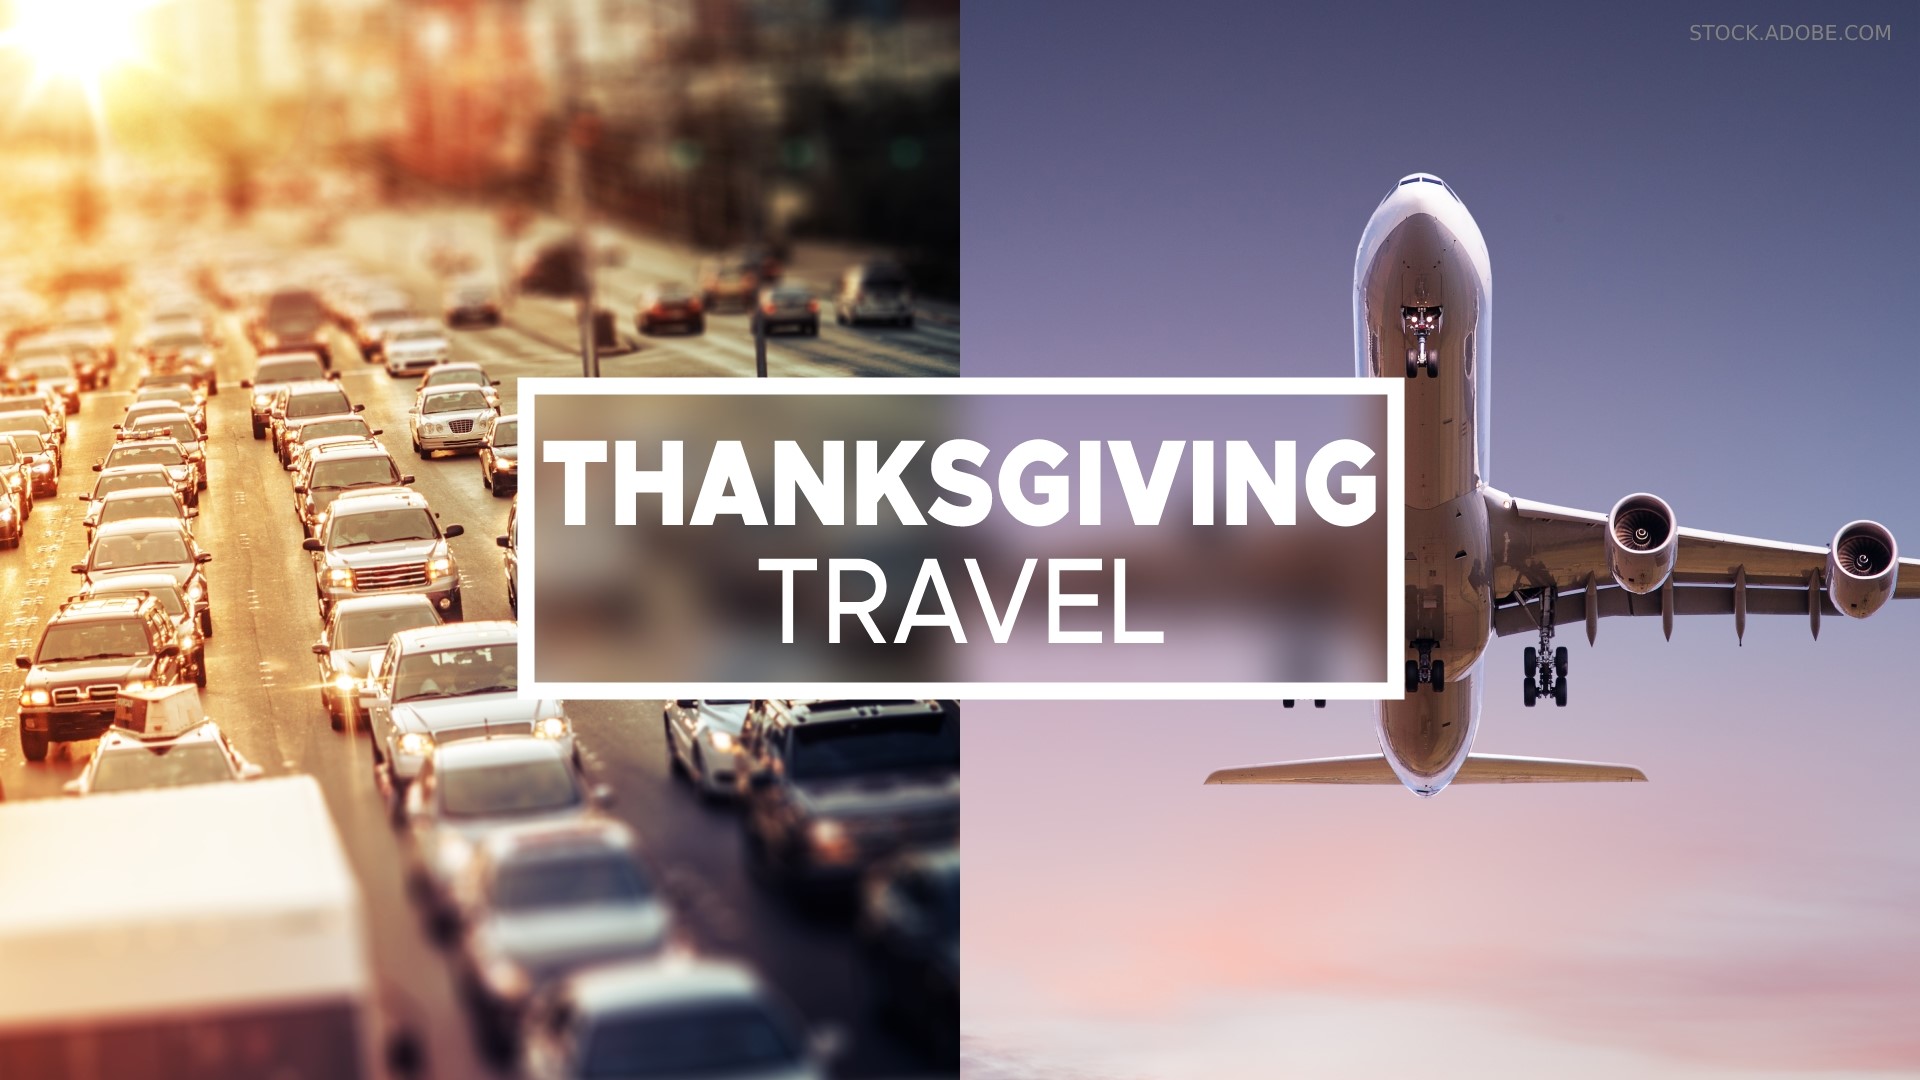 Thousands of people will be flying out of the Buffalo Niagara Airport ahead of the Thanksgiving holiday. Air travel is back within 5% of where it was in 2019.